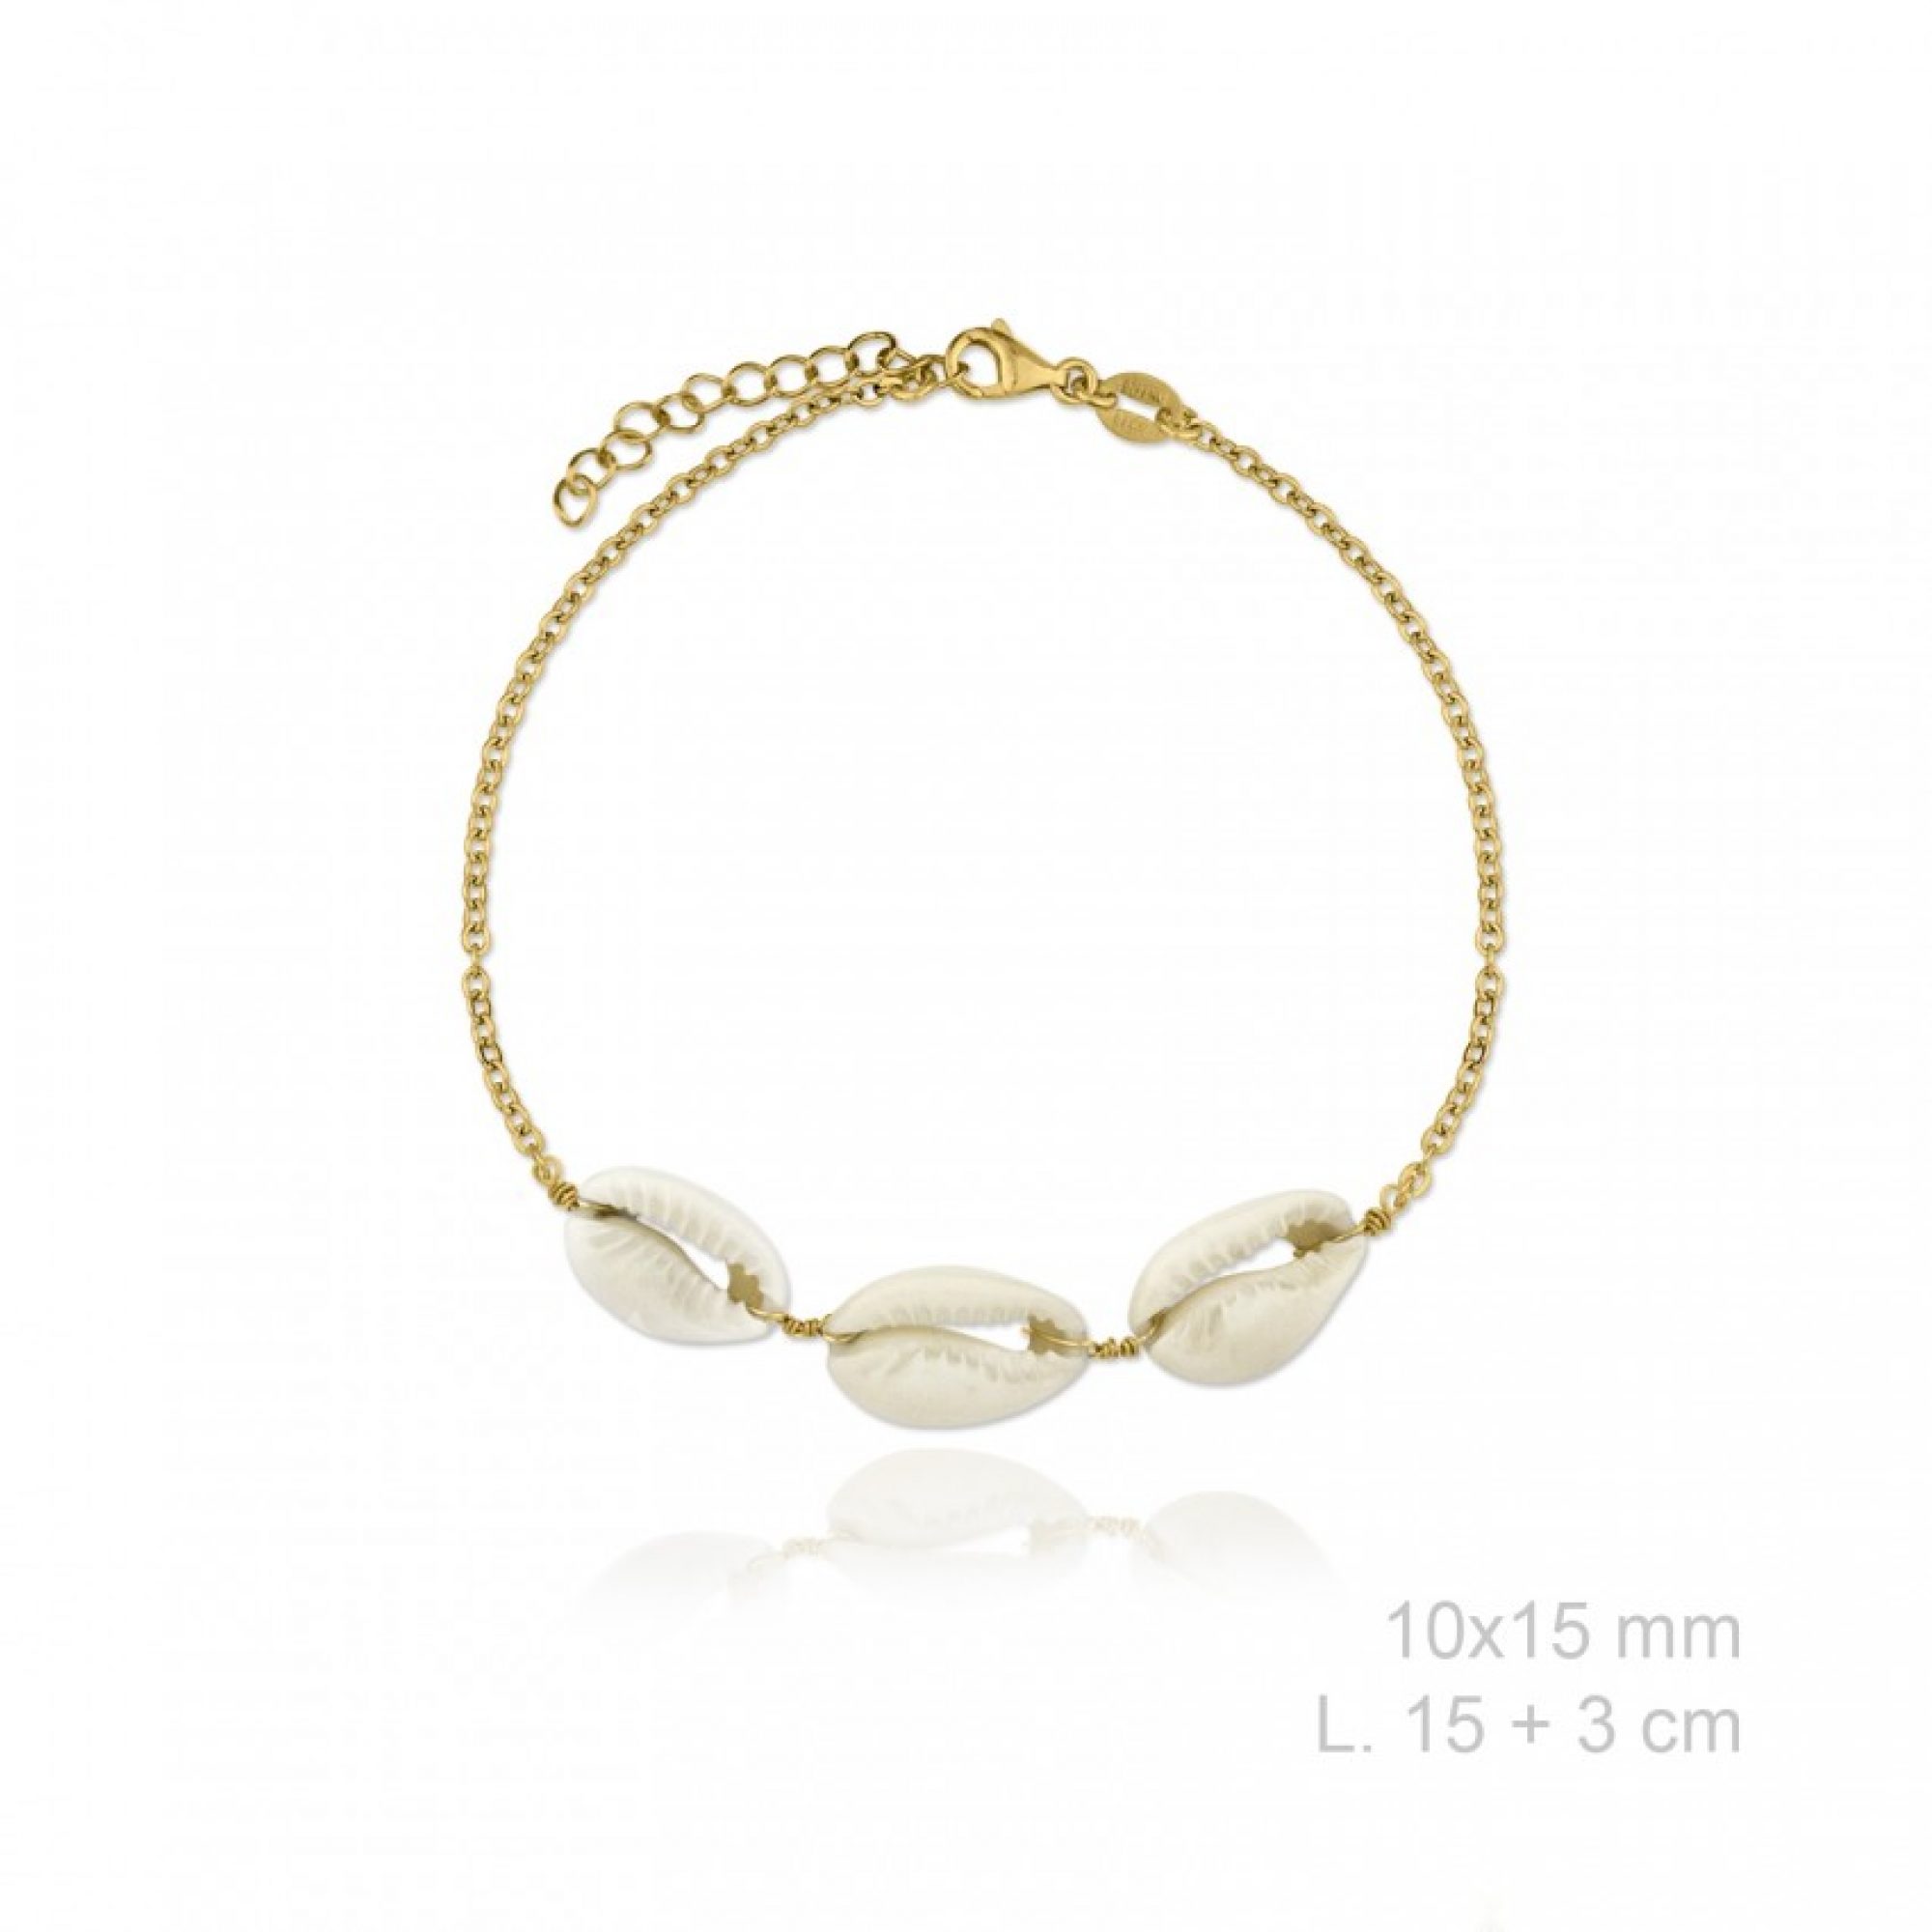 Gold plated bracelet with seashells